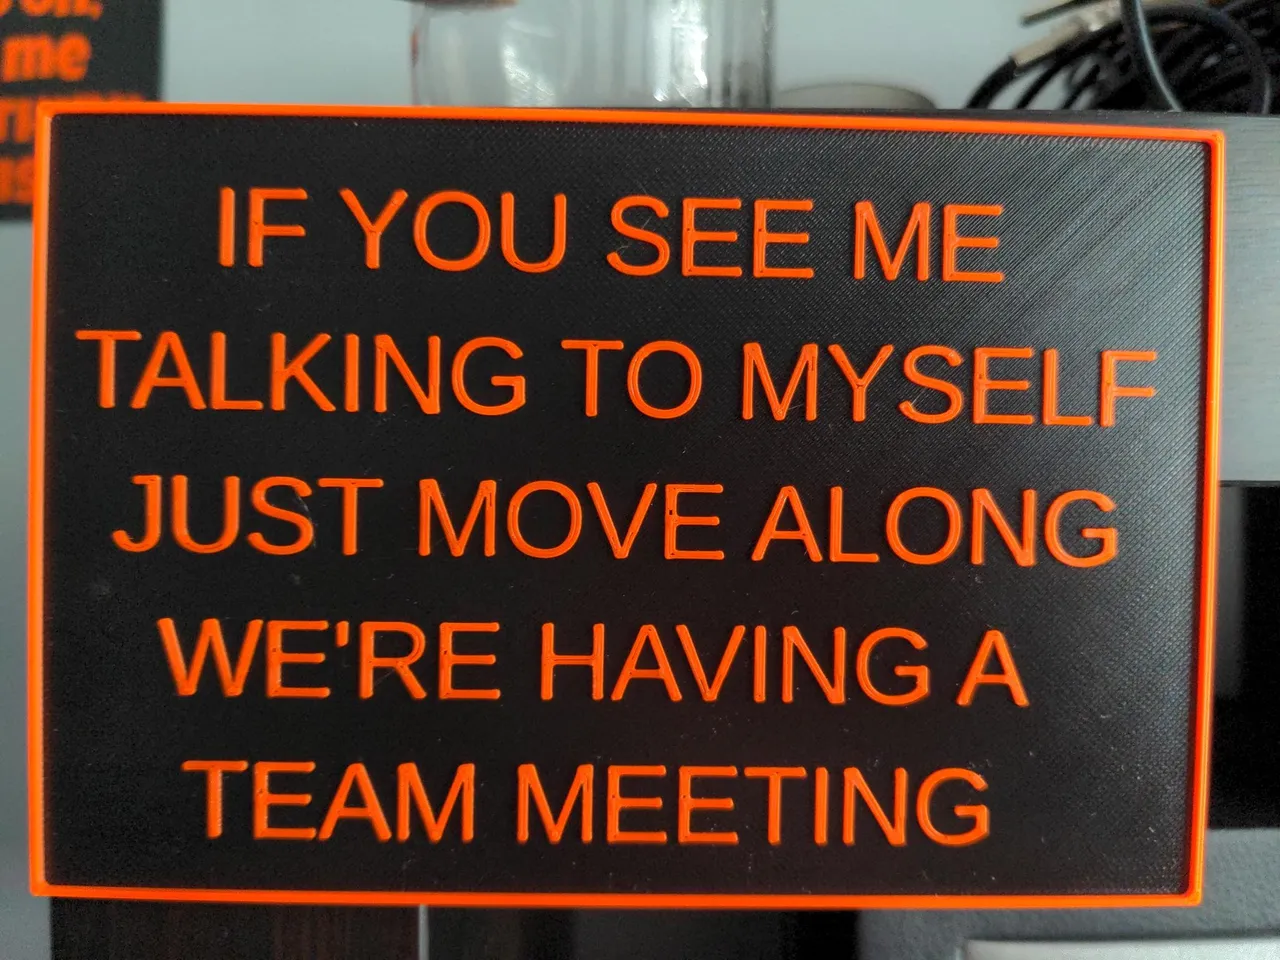 staff meeting sign